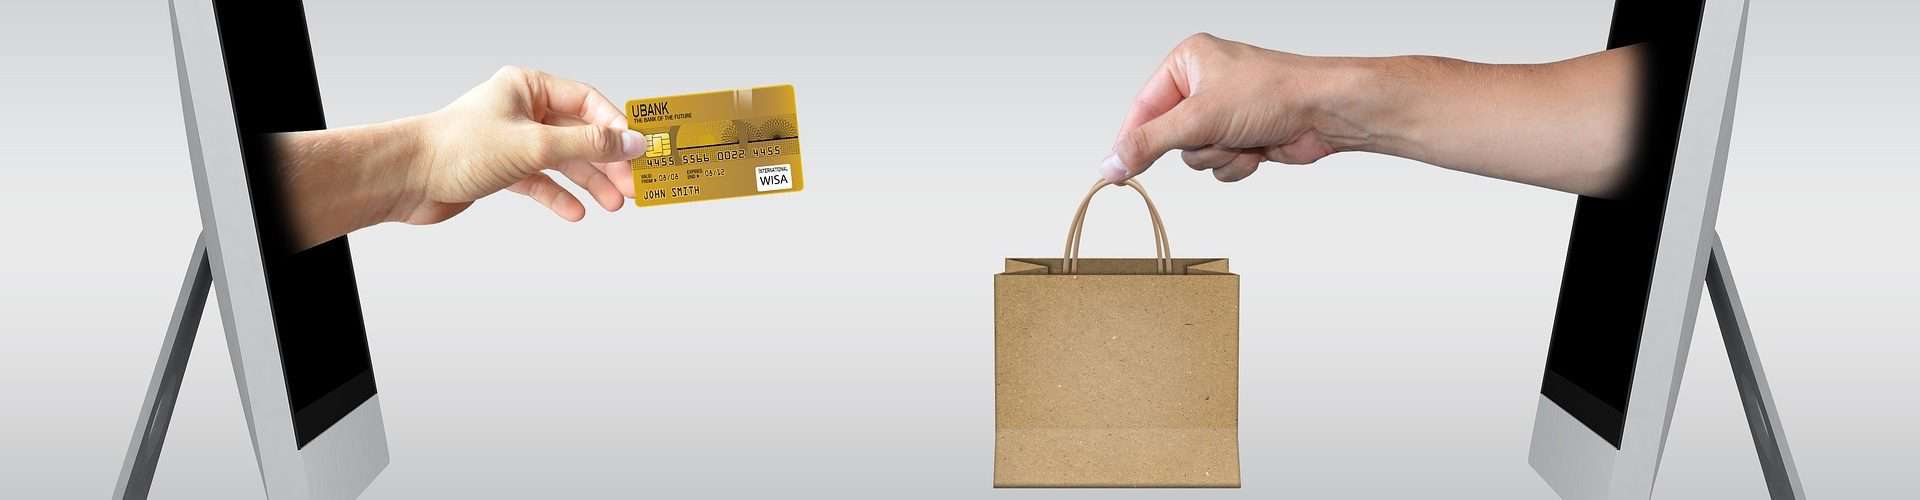 Cyber Monday Cybersecurity Credit Card Fraud